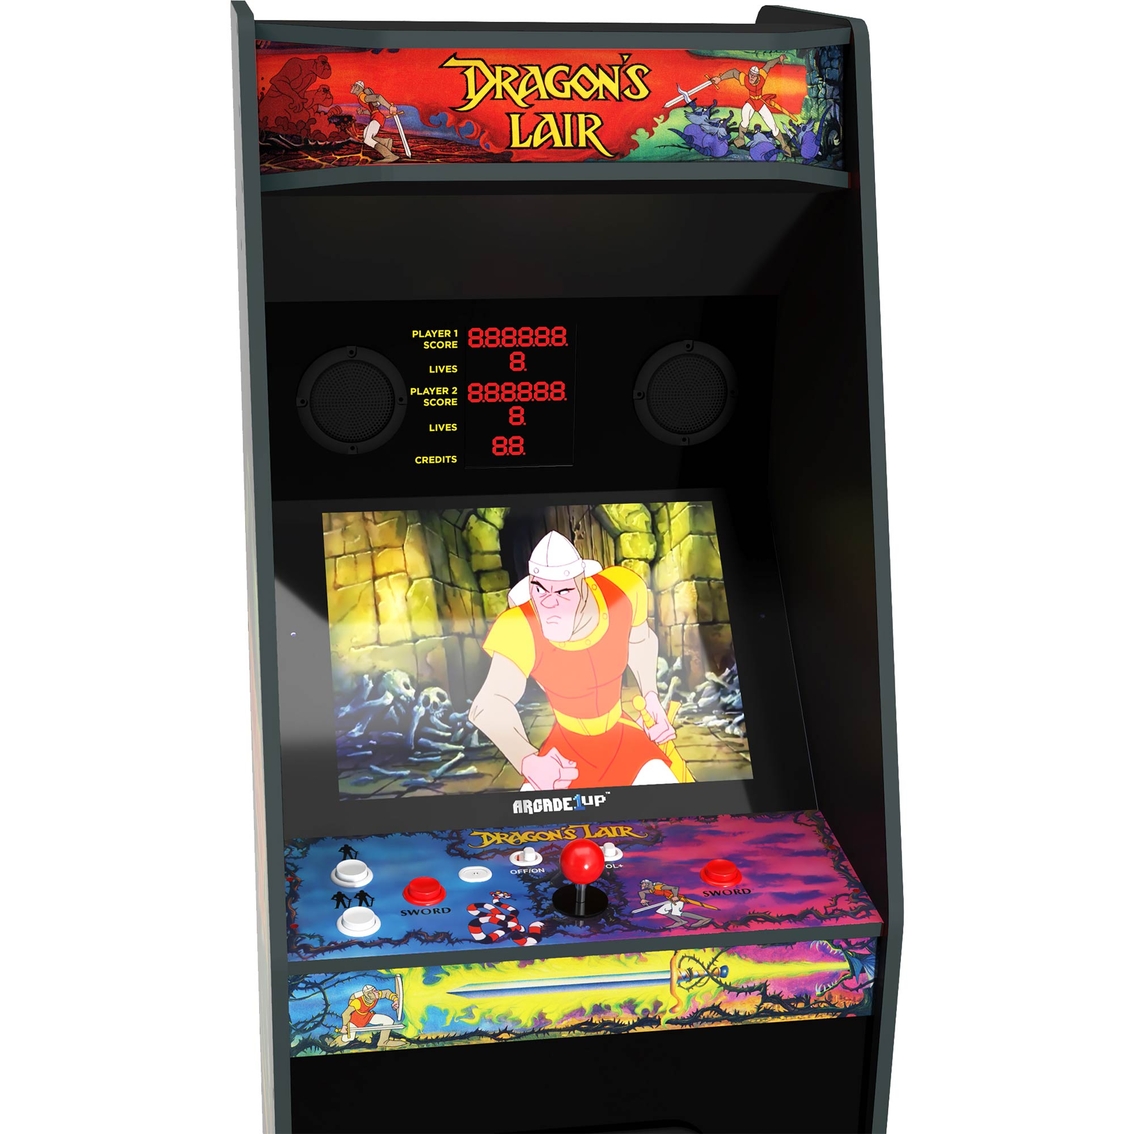 Arcade 1UP Dragon's Lair Home Arcade Game - Image 6 of 7